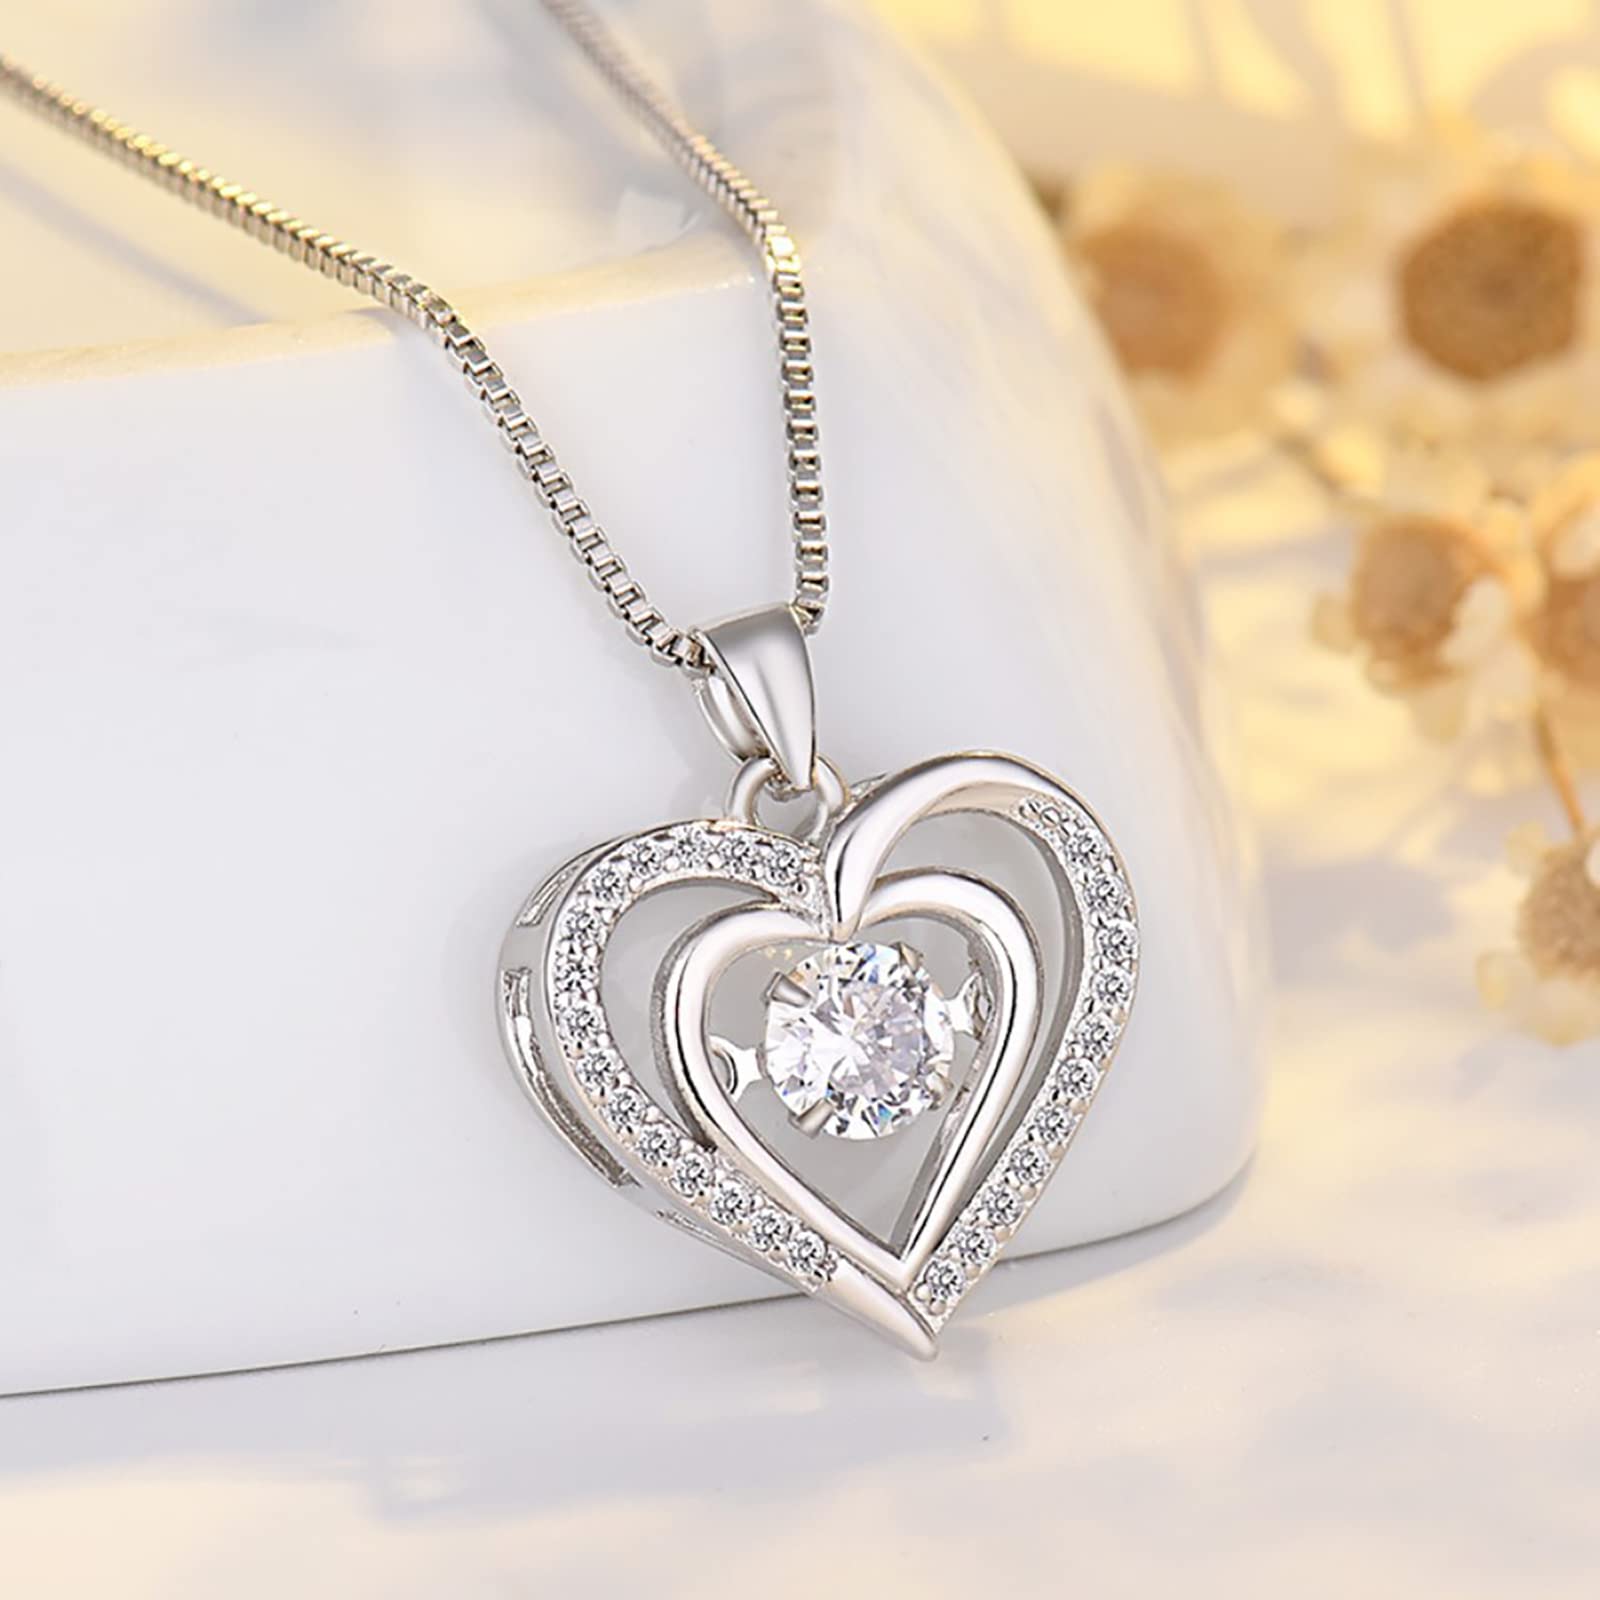 WSKFLY Heart Pendant Necklaces for Women 14K Rose Gold Plated with Birthstone Zirconia,Christmas Birthday Anniversary Jewelry Gift for Women Wife Girls Her 18+2 inch